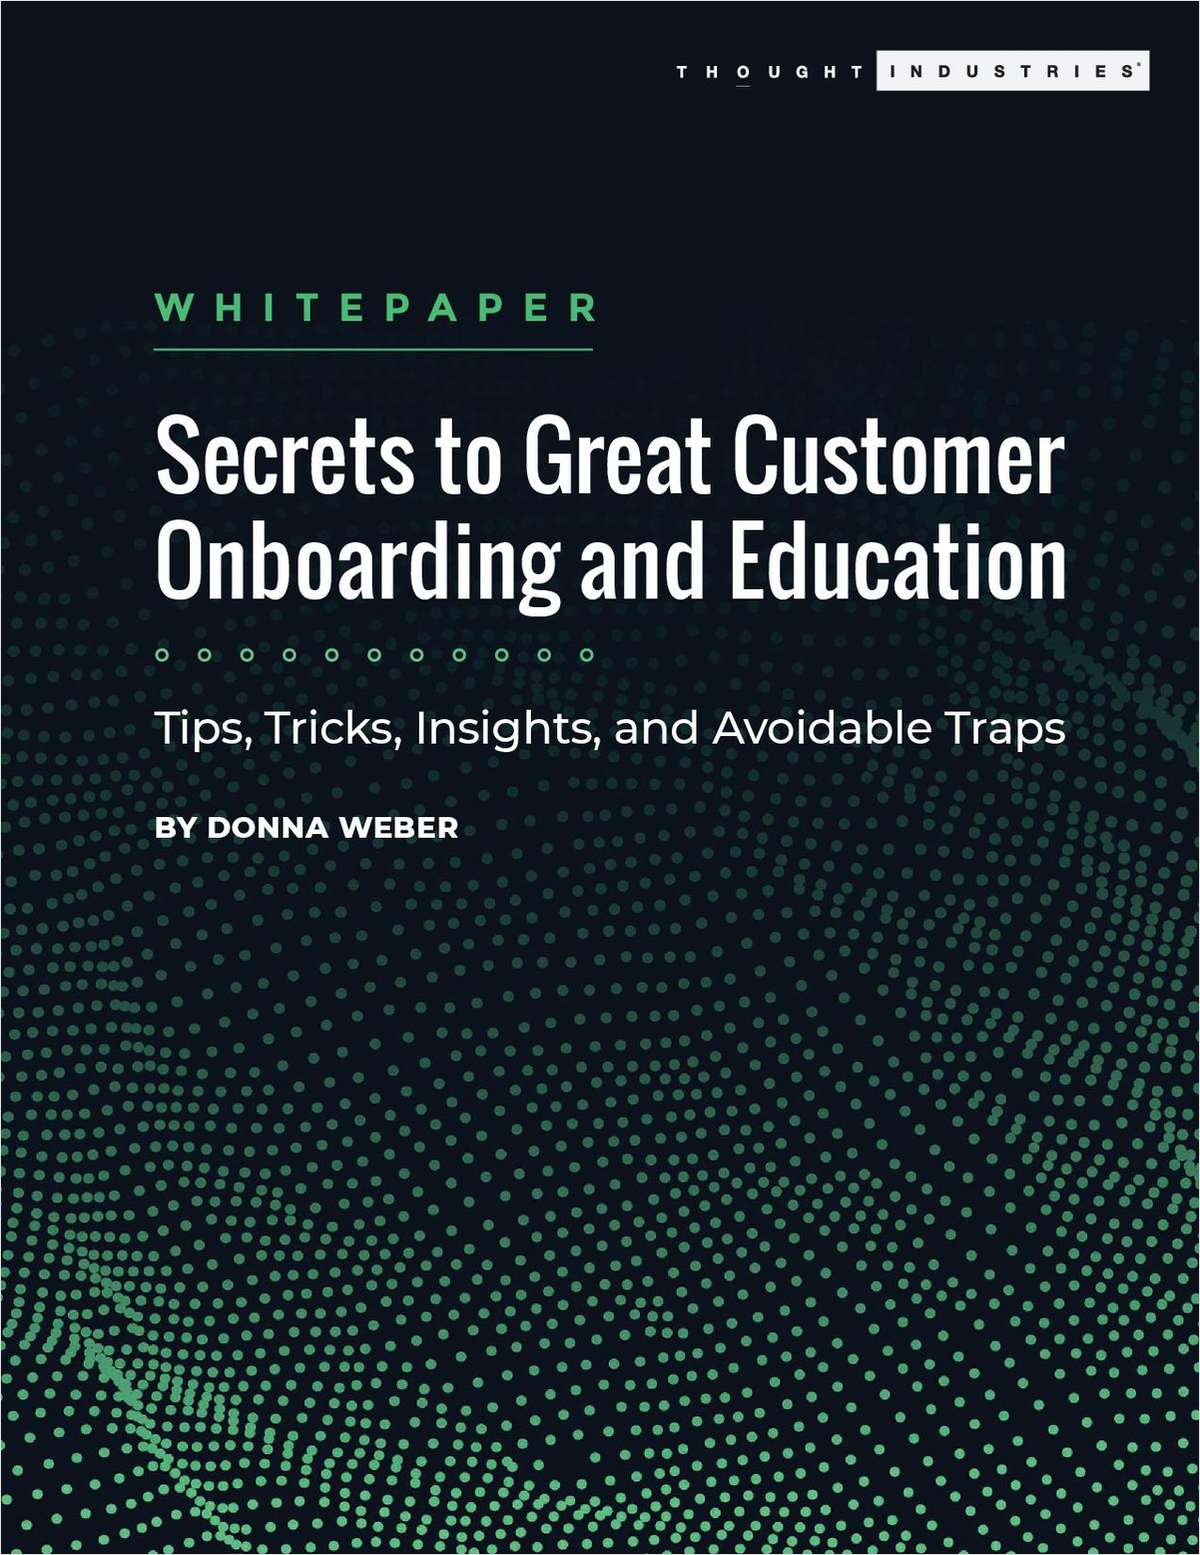 Secrets to Great Customer Onboarding and Education